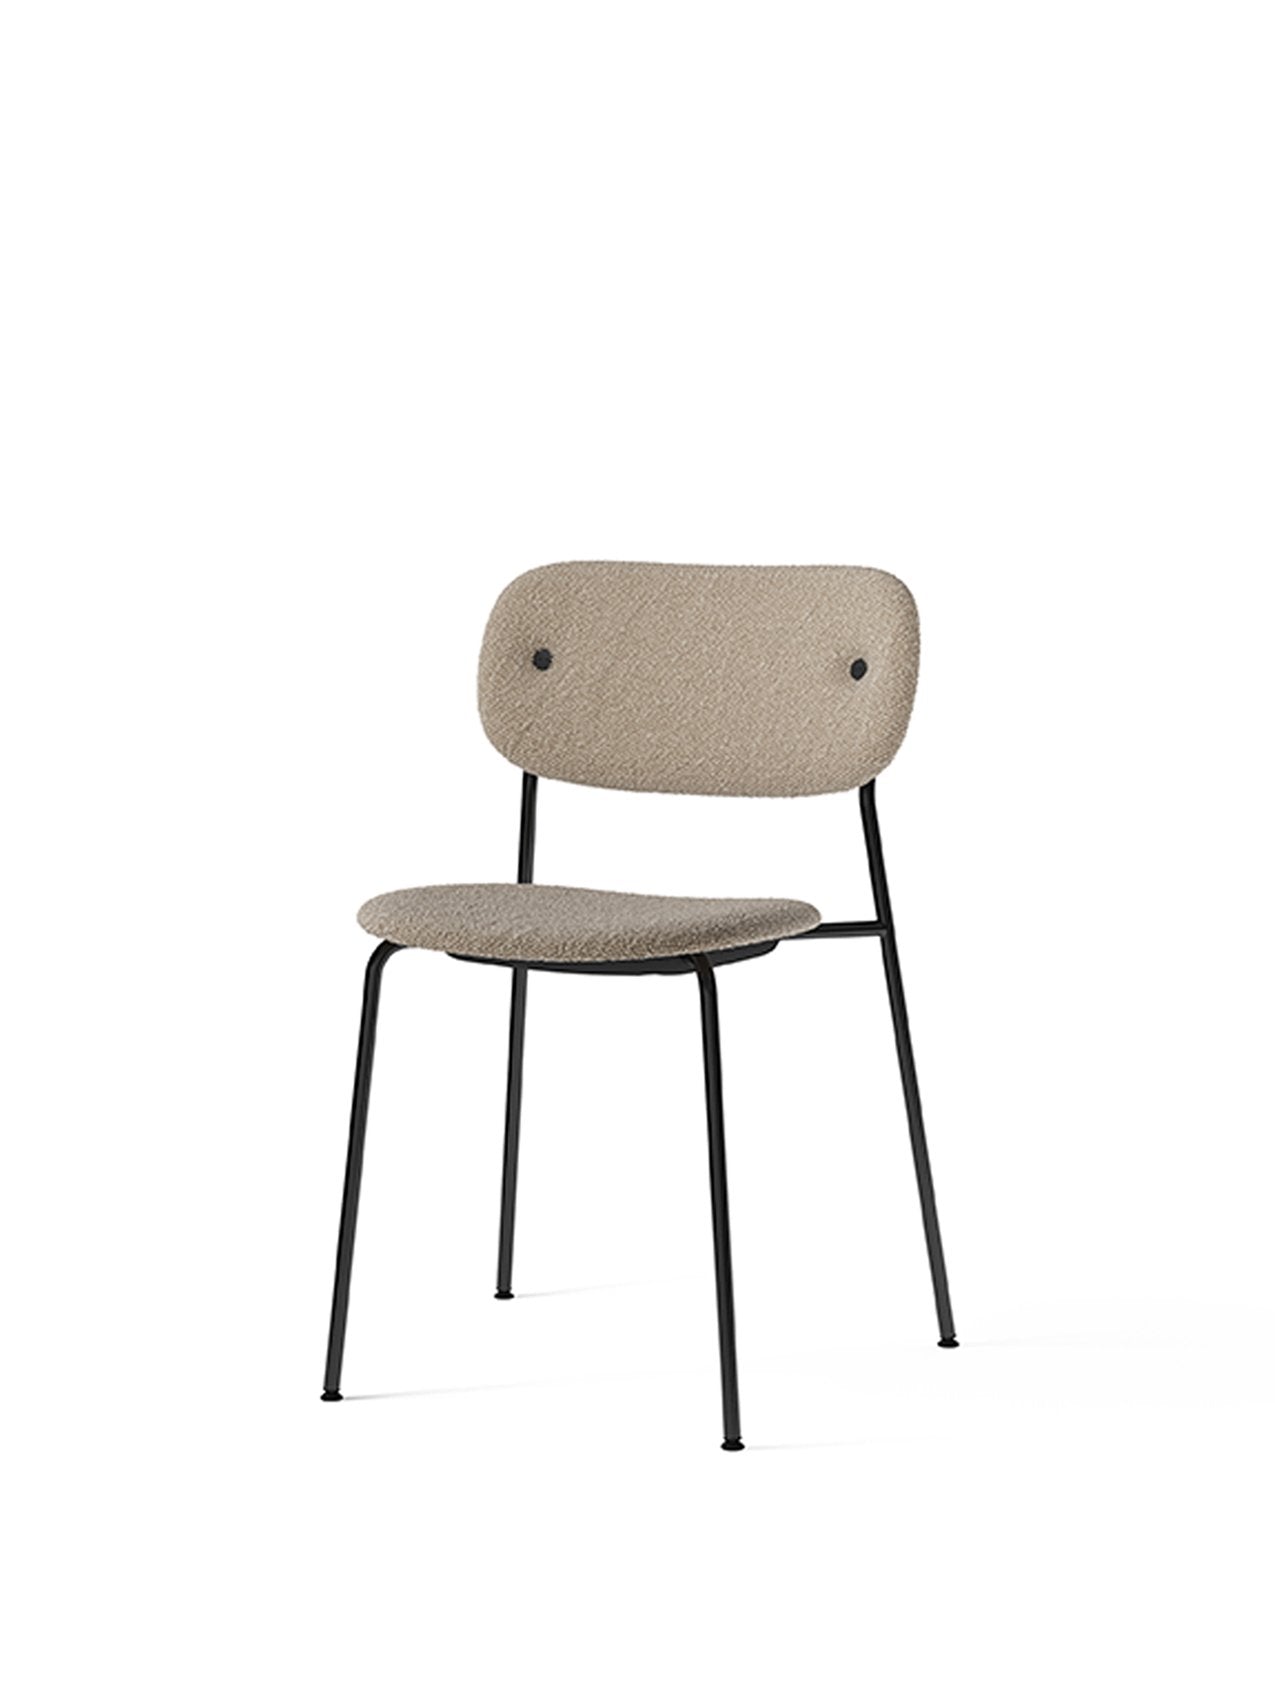 Co Chair, Fully Upholstered-Chair-MENU Design Shop